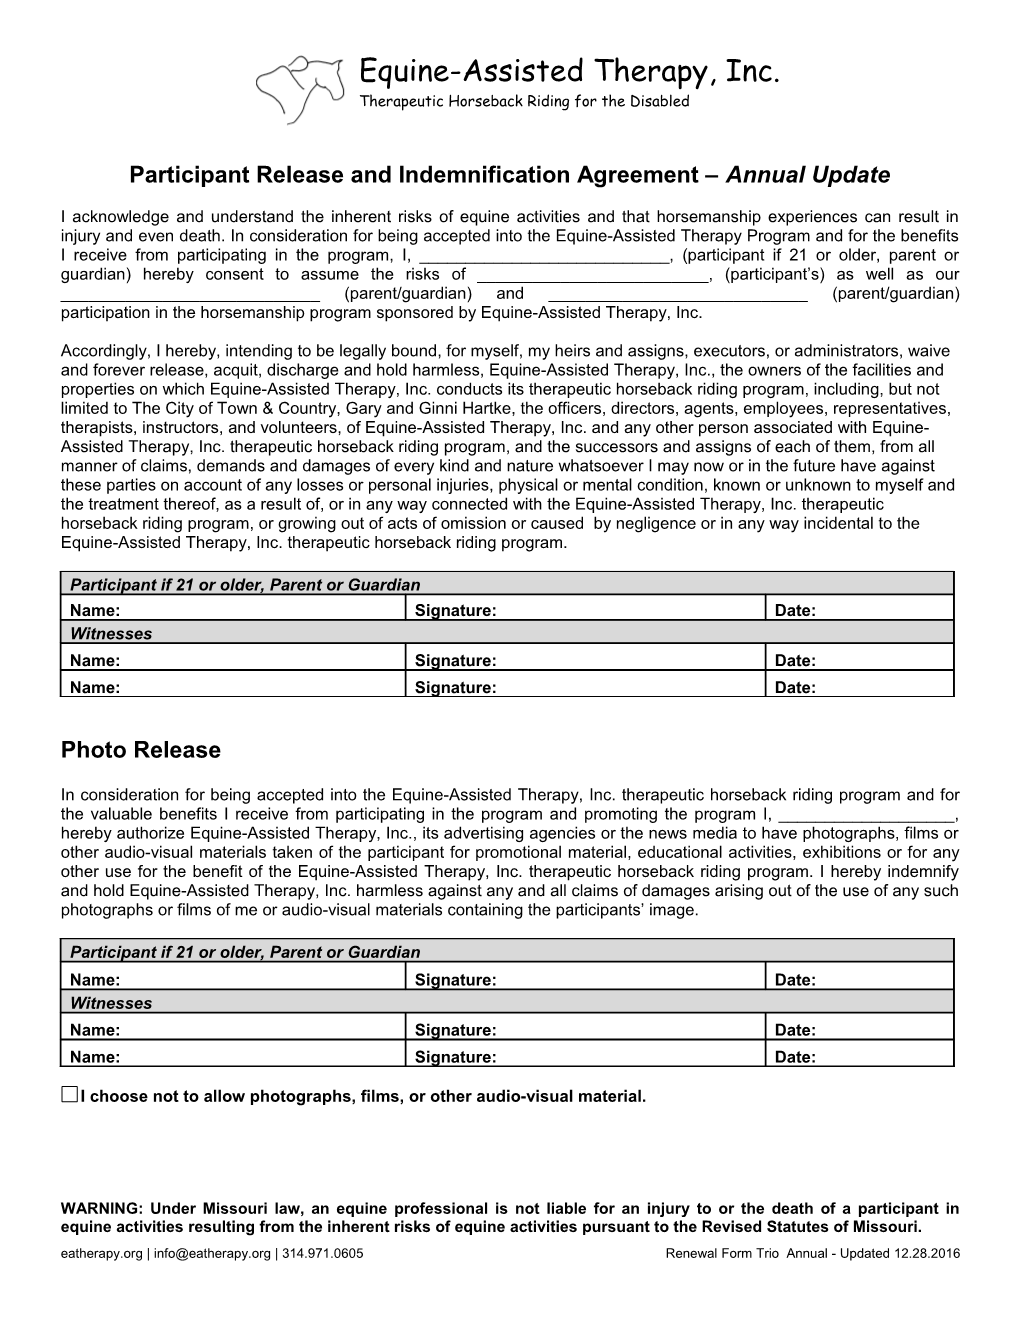 Participant Release and Indemnification Agreement Annual Update